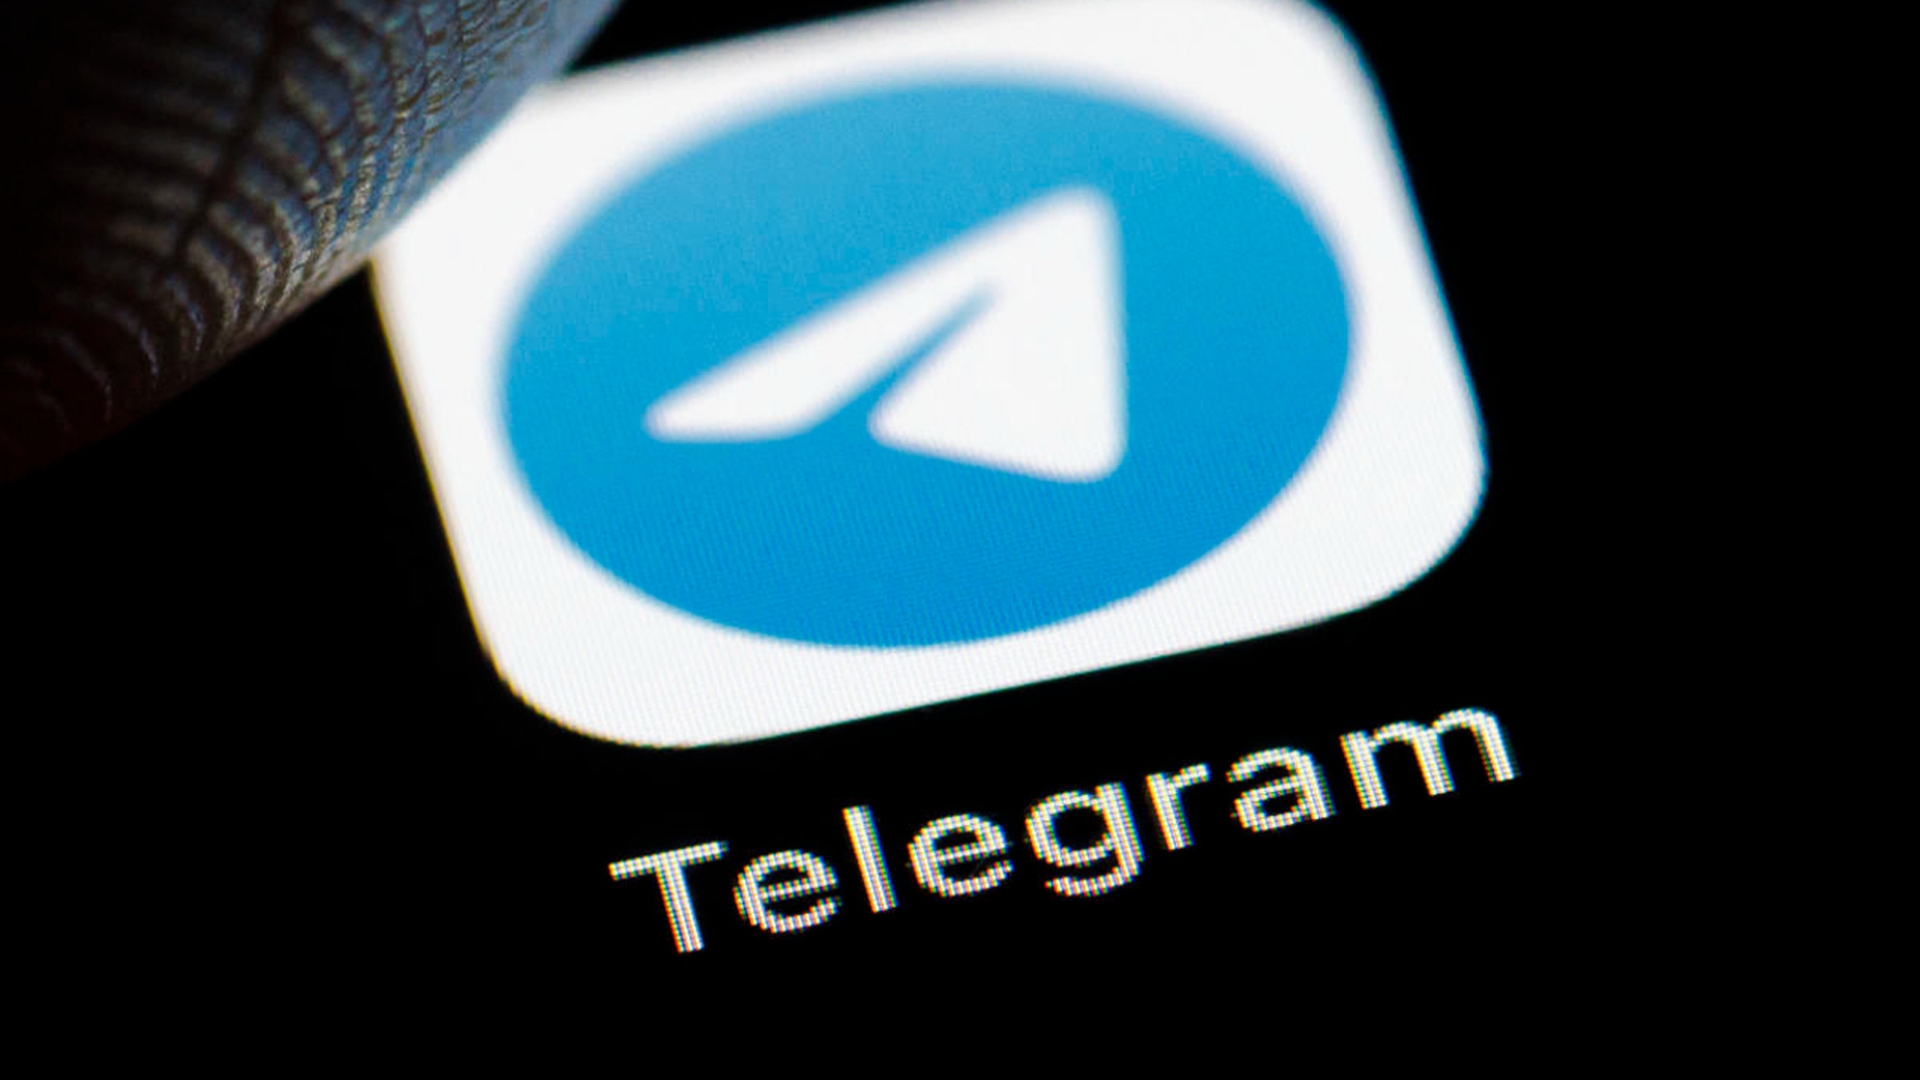 In this article, we are going to be covering the announcement of the Telegram paid subscription by creator Pavel Durov, and how it will affect the app overall.